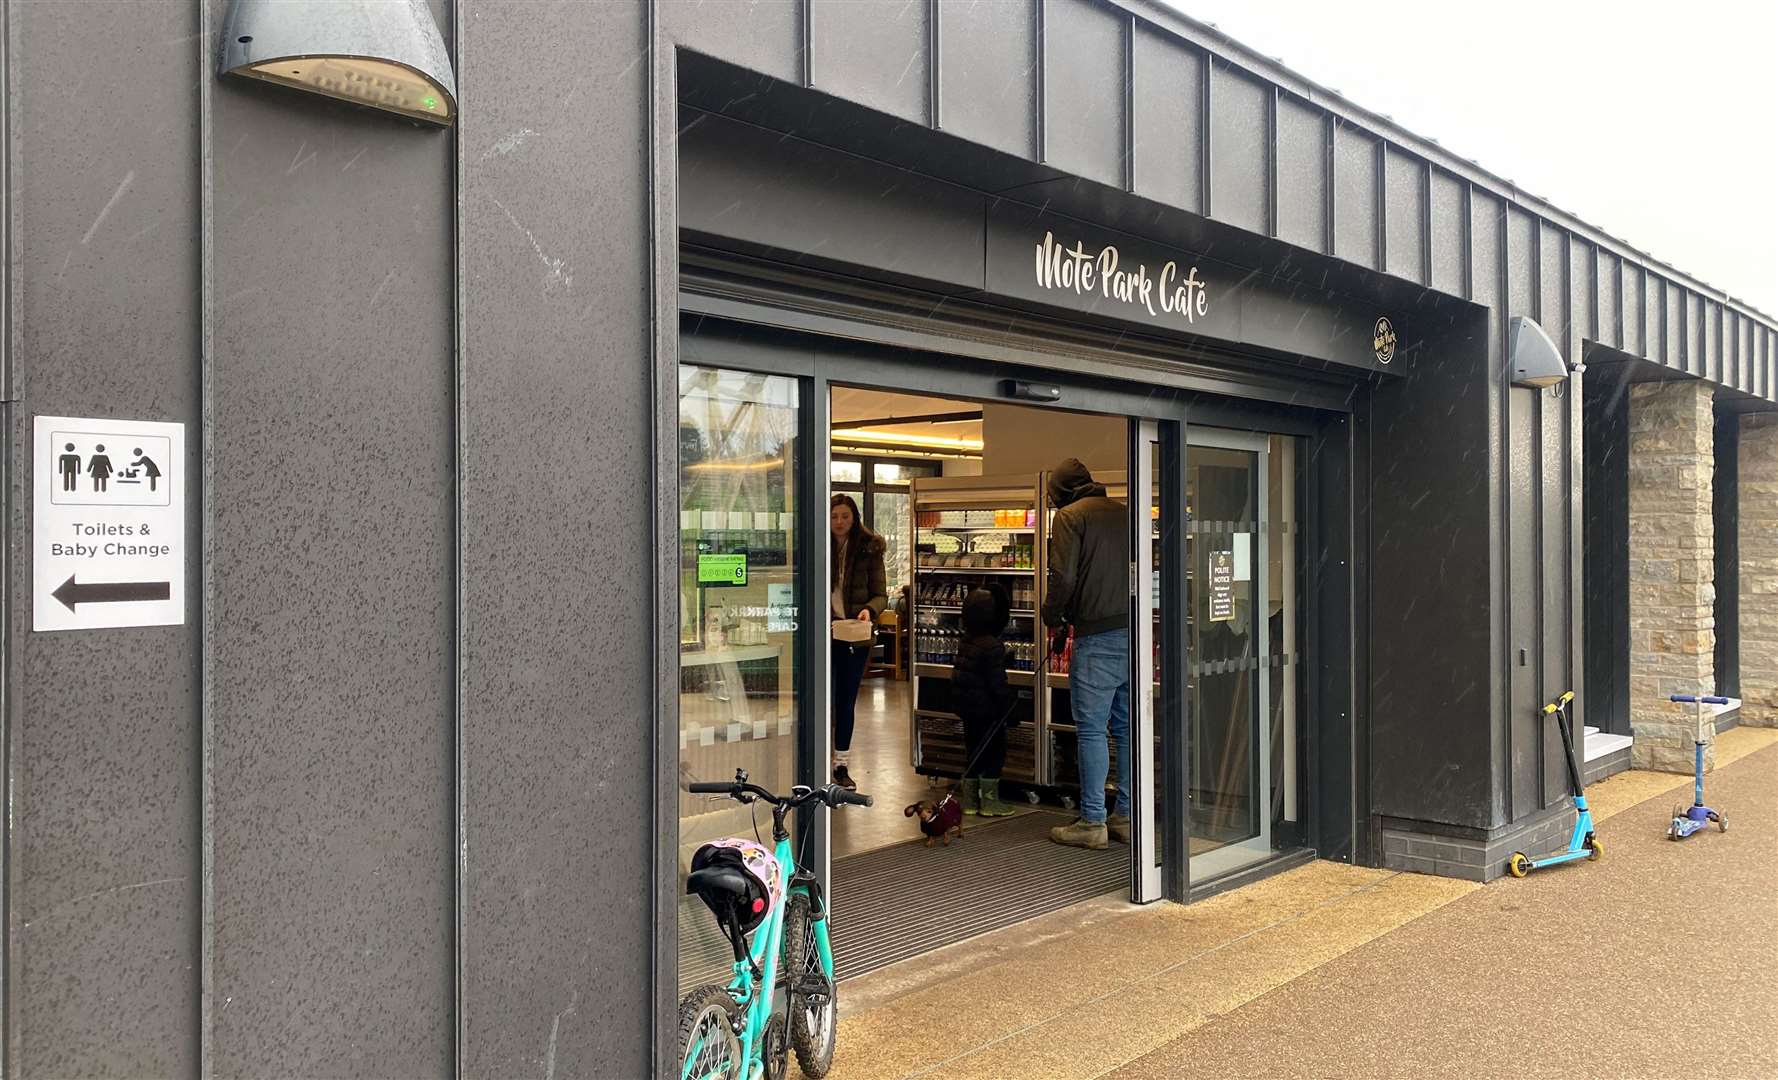 We visited the Mote Park Café in Maidstone on what turned out to be a wet and windy weekend. Picture: Sam Lawrie